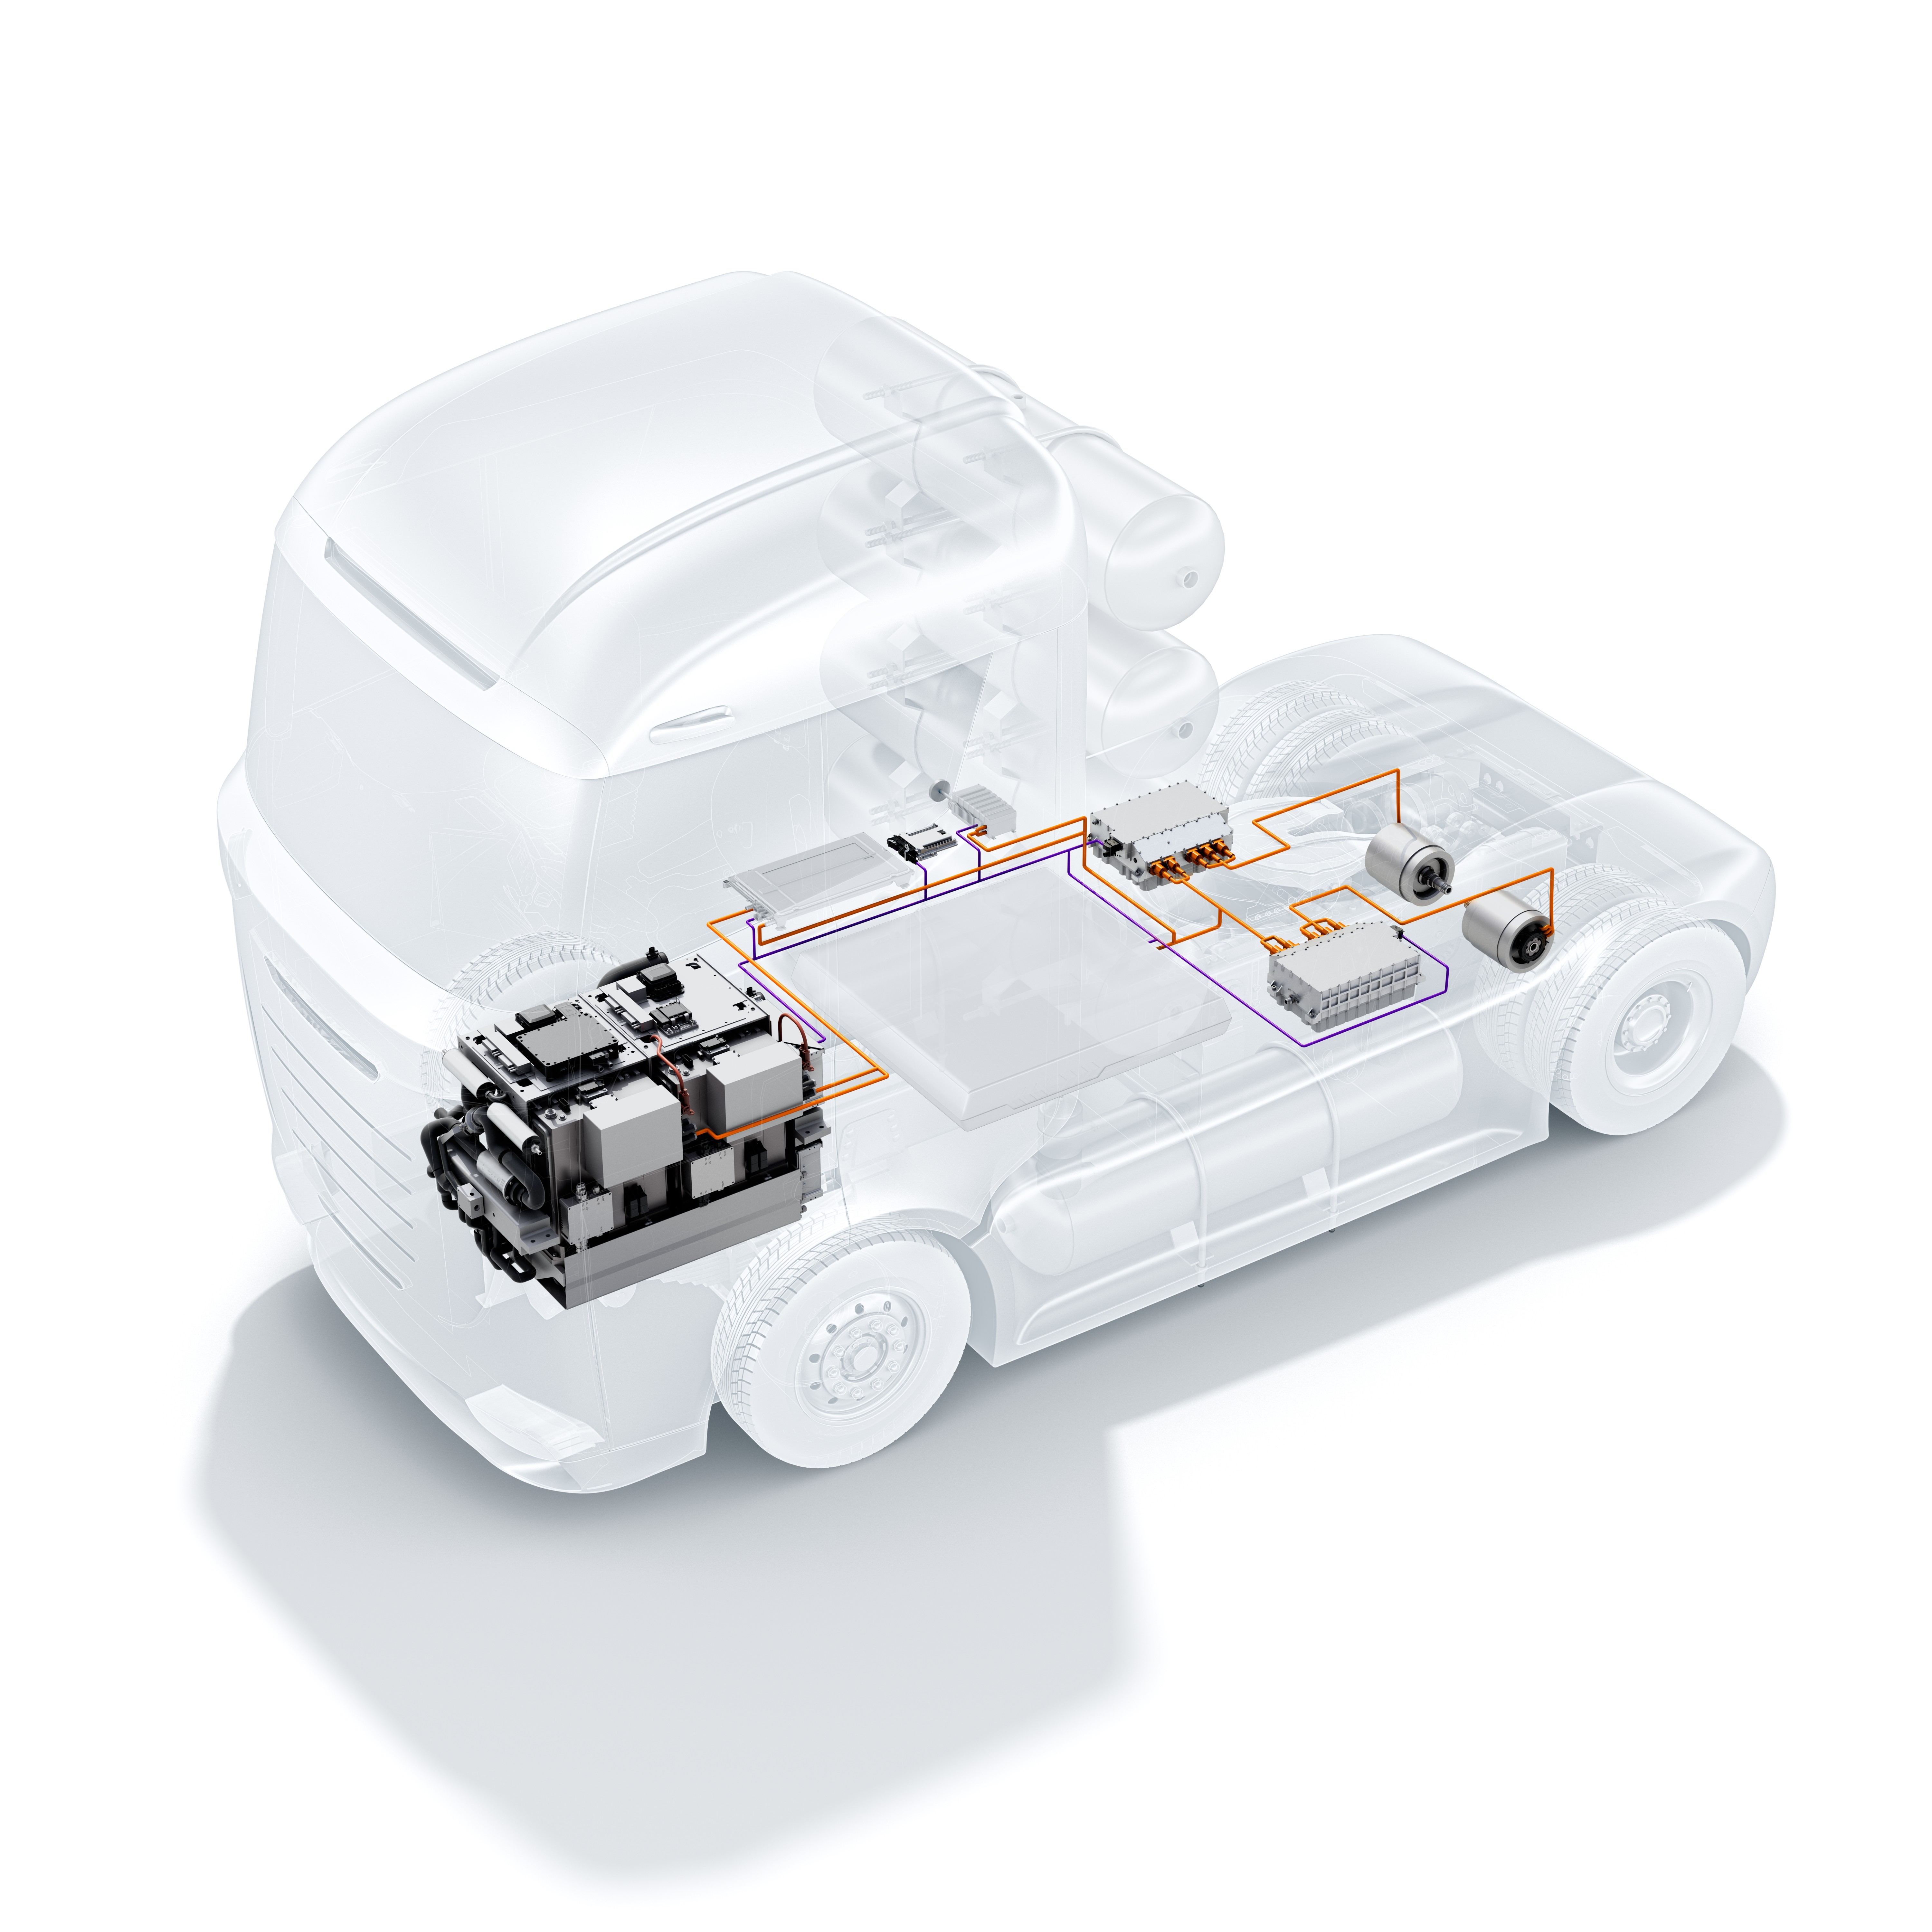 Electric powertrain solutions for light commercial vehicles from Bosch